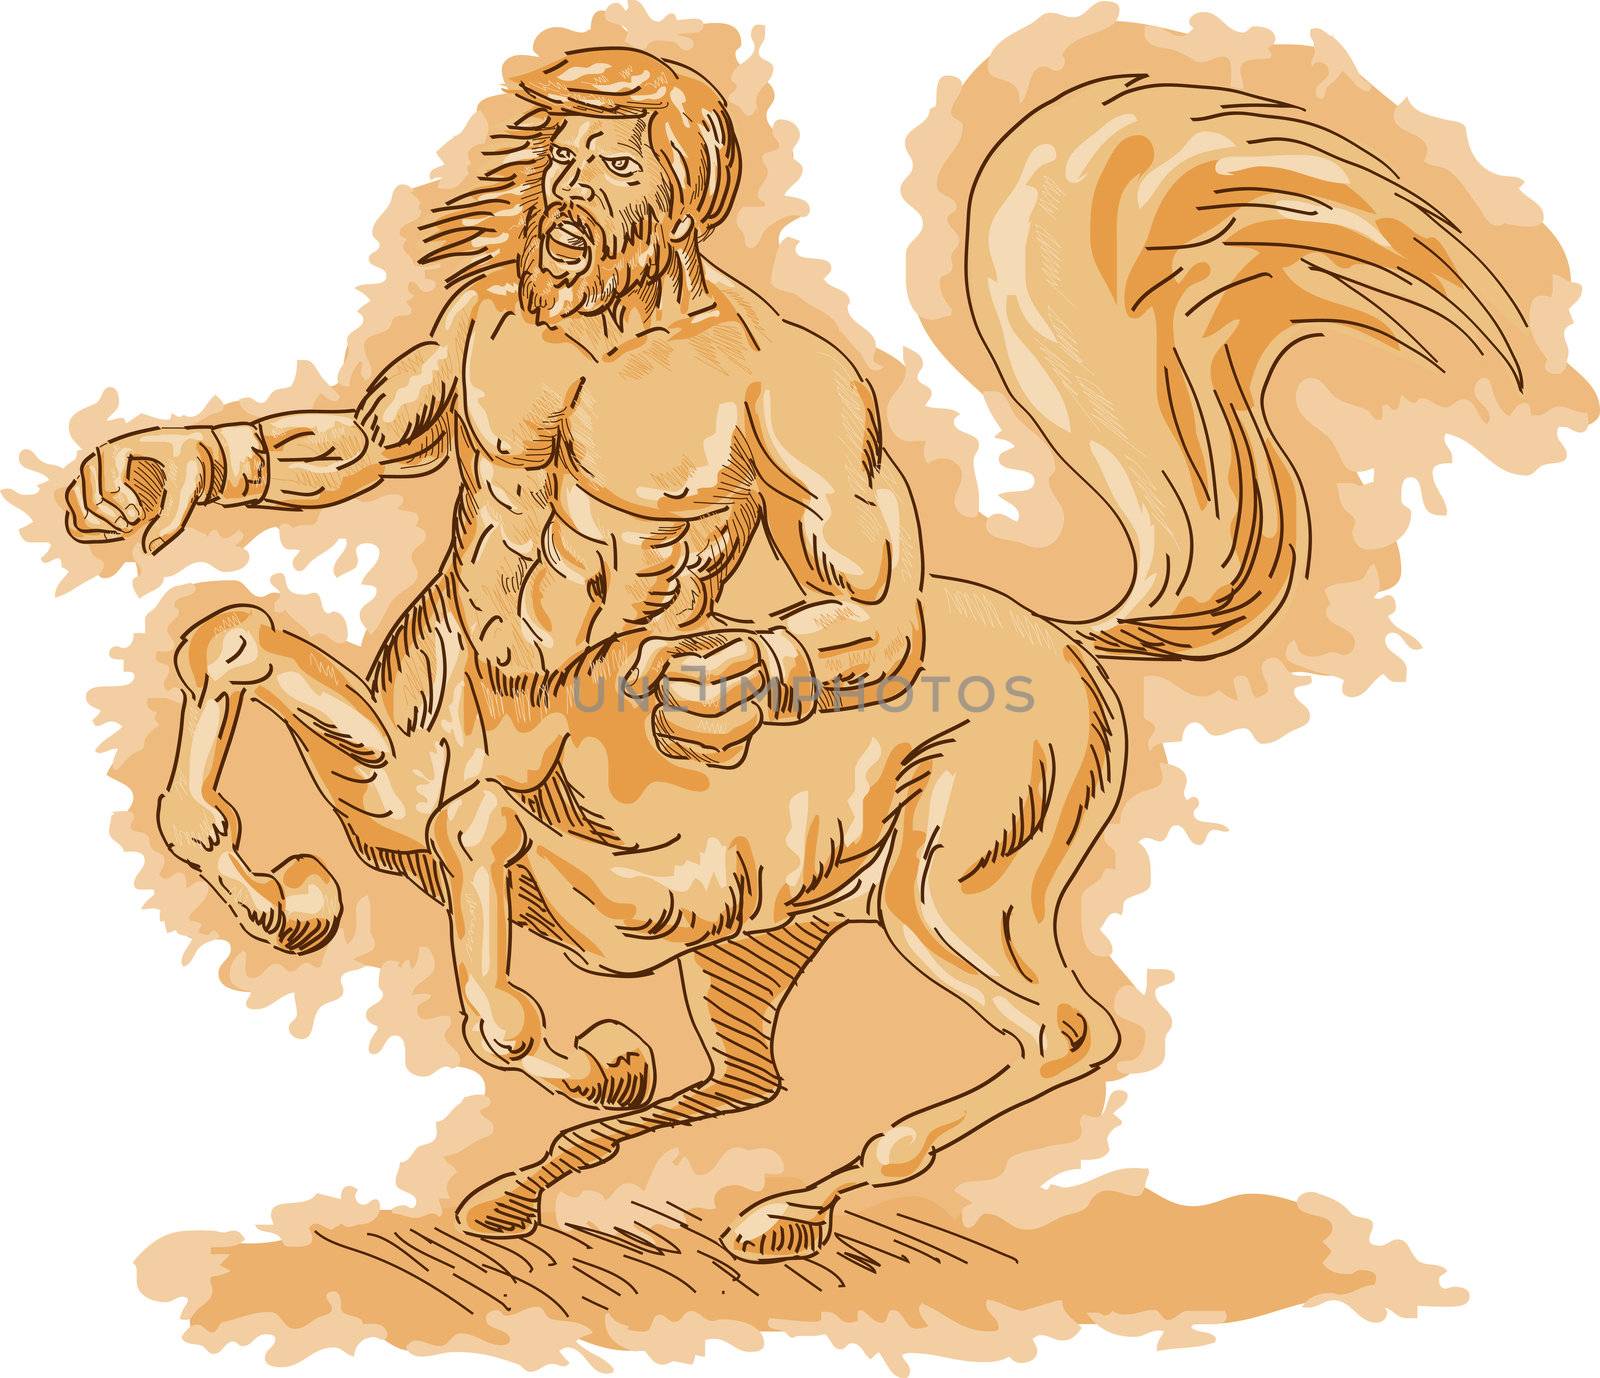 Centaur angry and rearing up by patrimonio